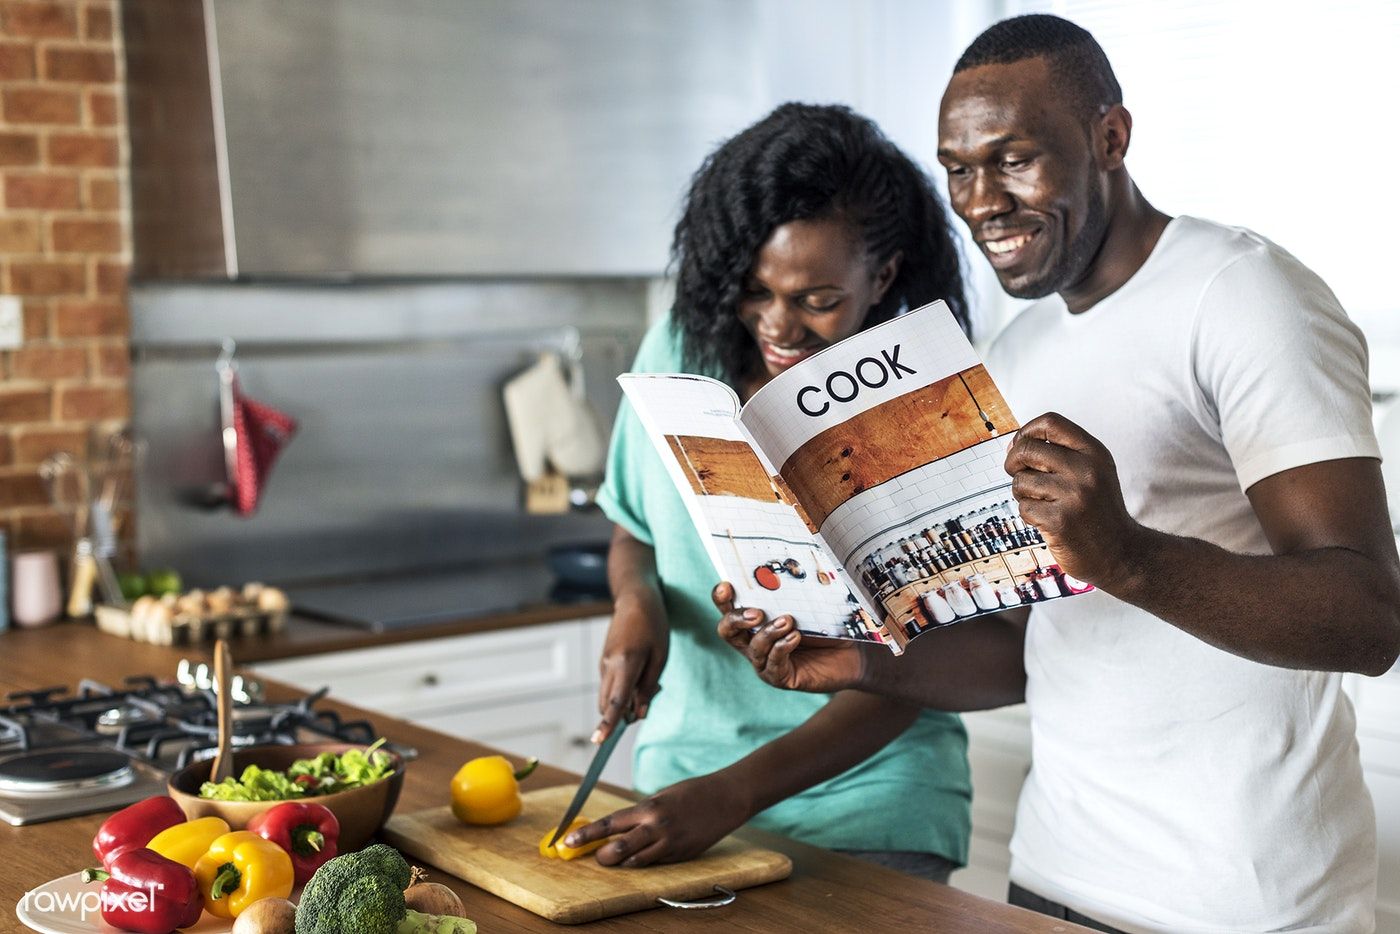 “Love in the Kitchen: Strengthening Relationships Through Cooking Together”